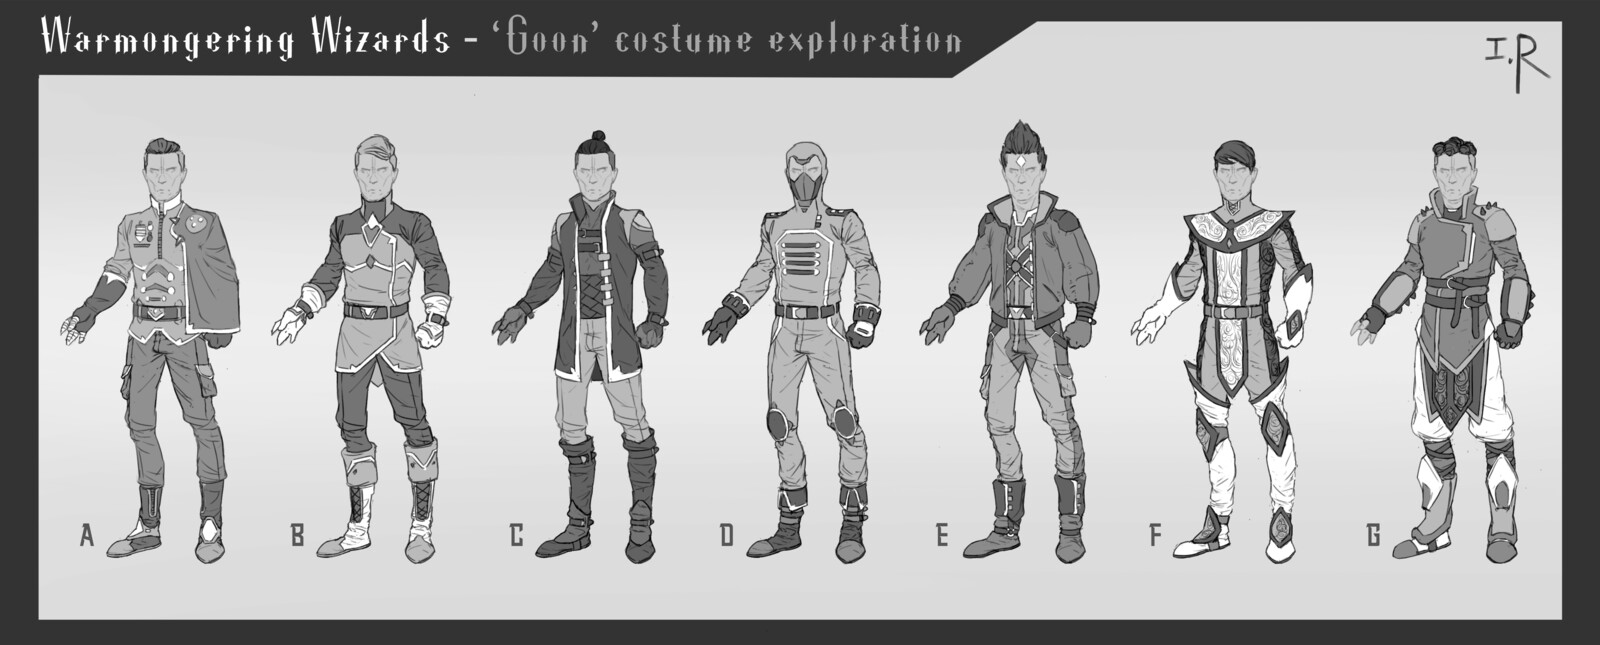 Additional costume exploration - what would their goons look like?